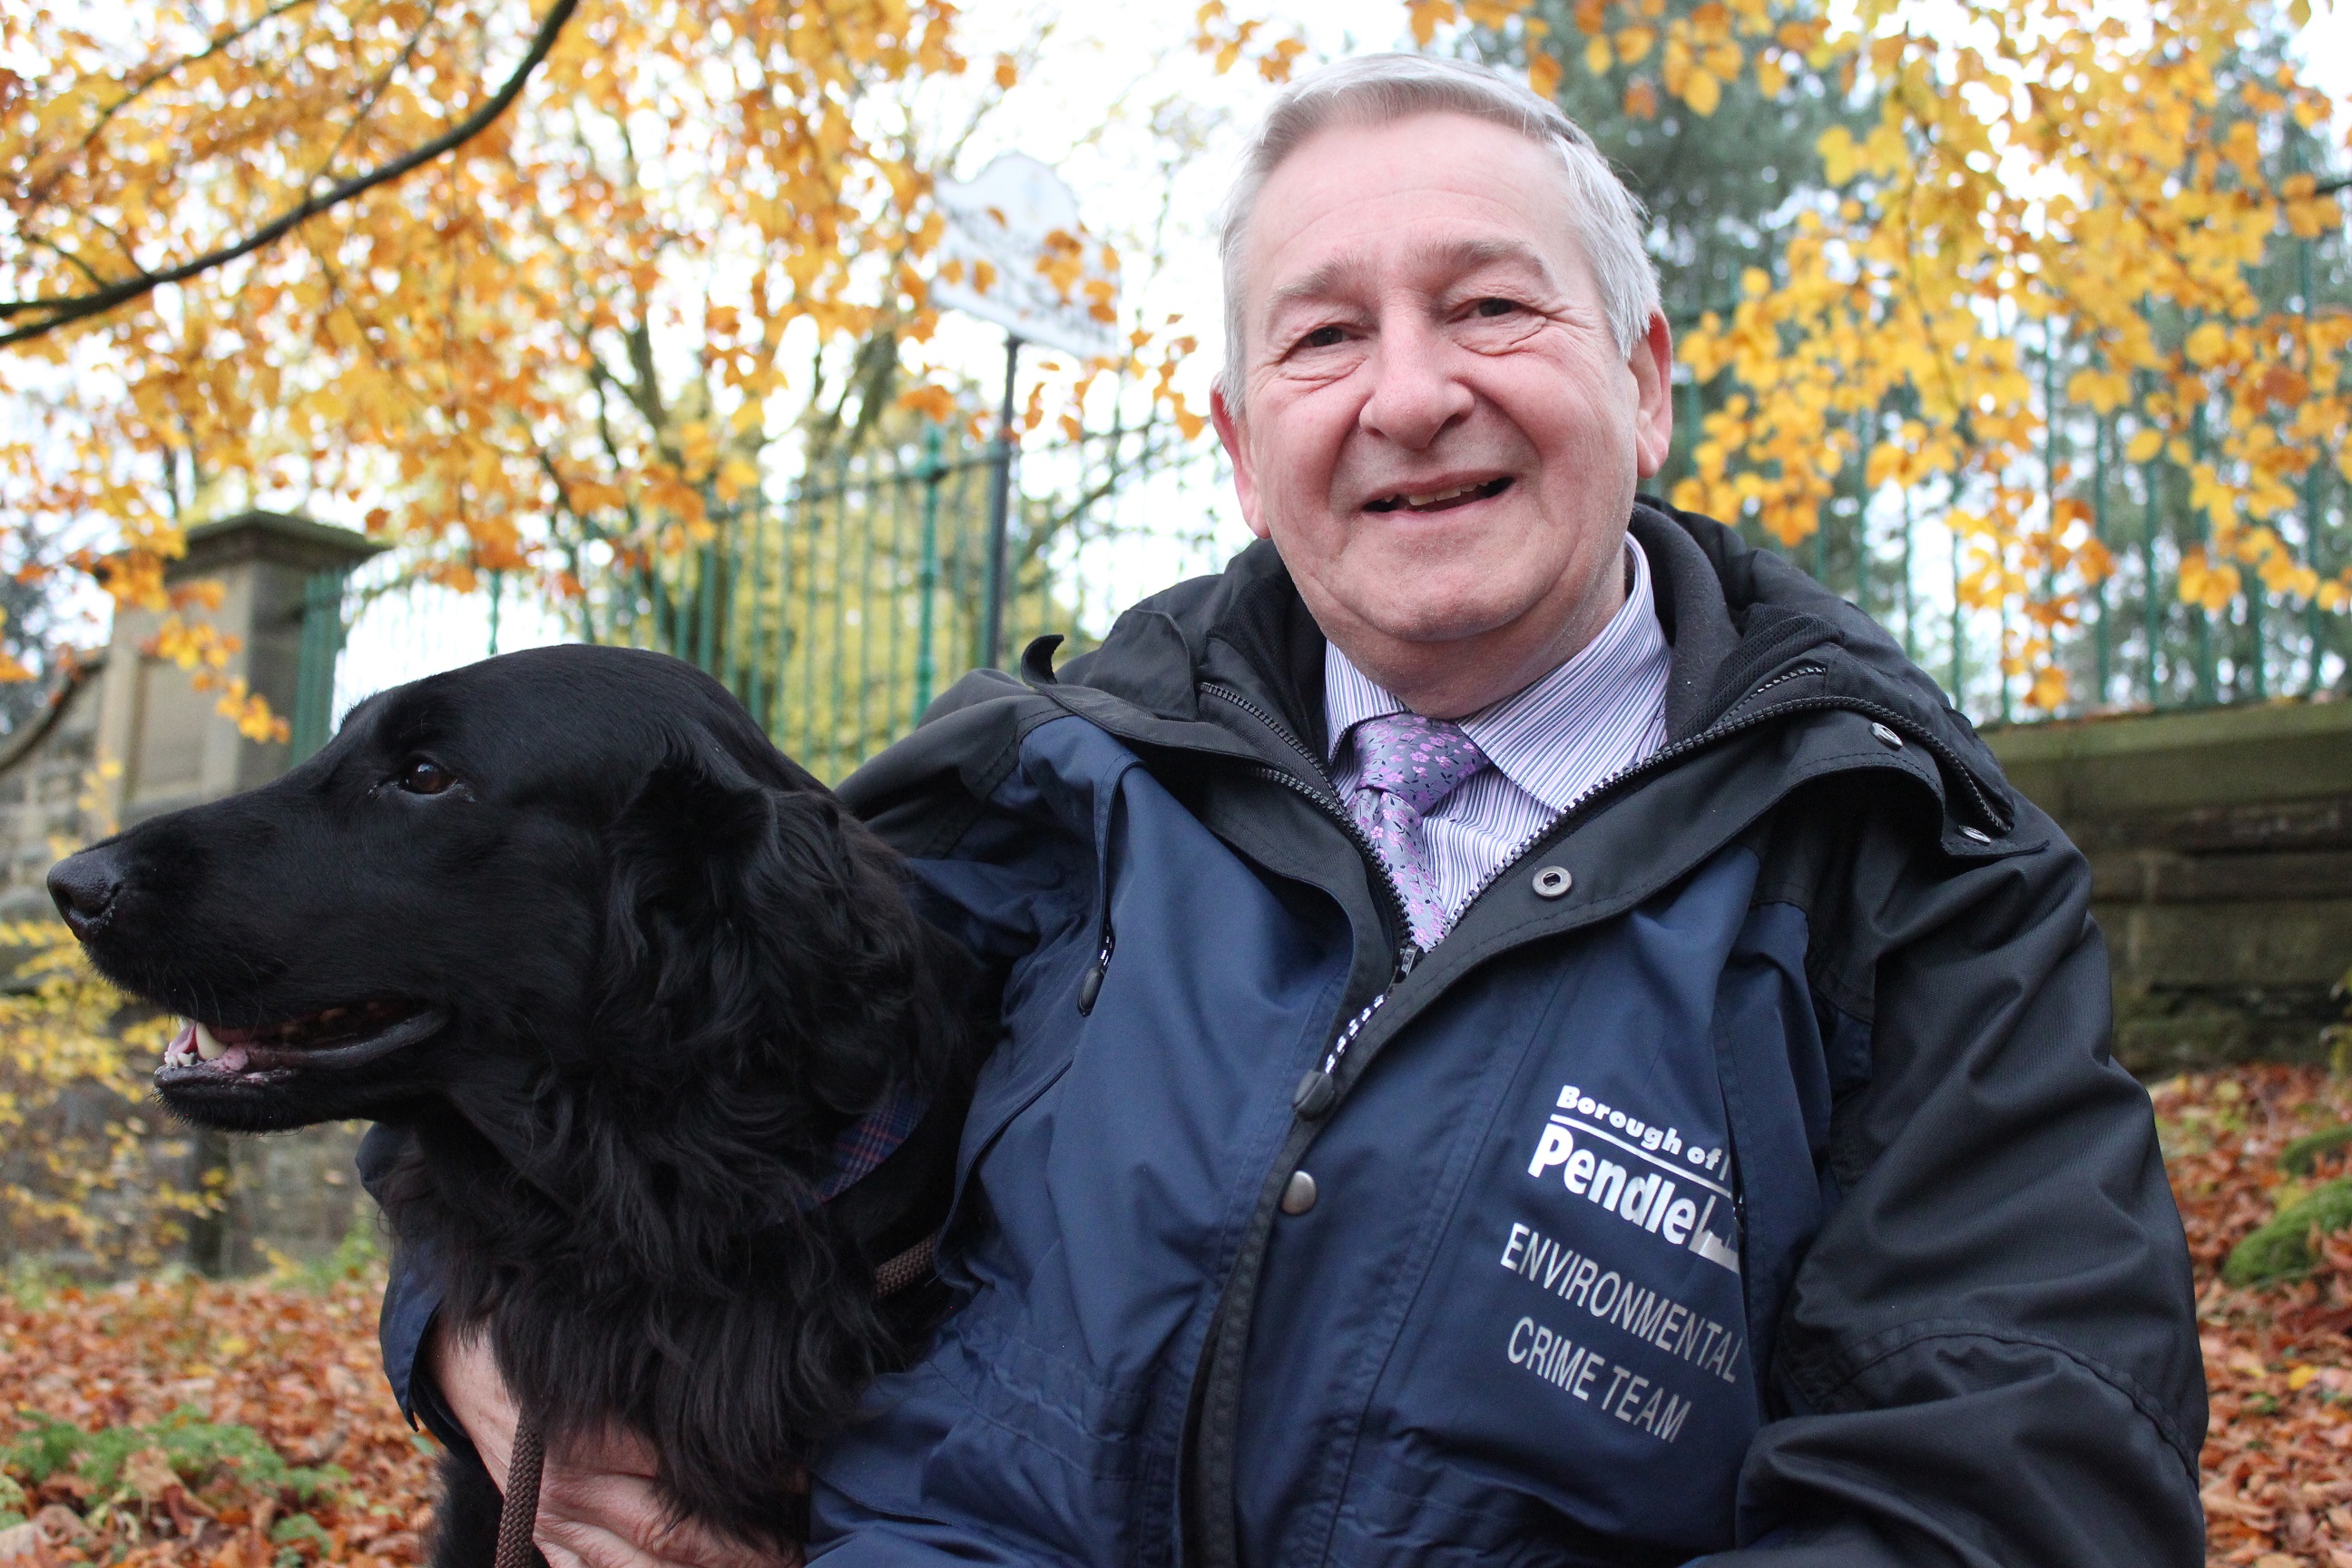 News story about Pendle Council and the Dogs Trust teaming up for a free microchipping event for dogs on Tues 4 Dec.